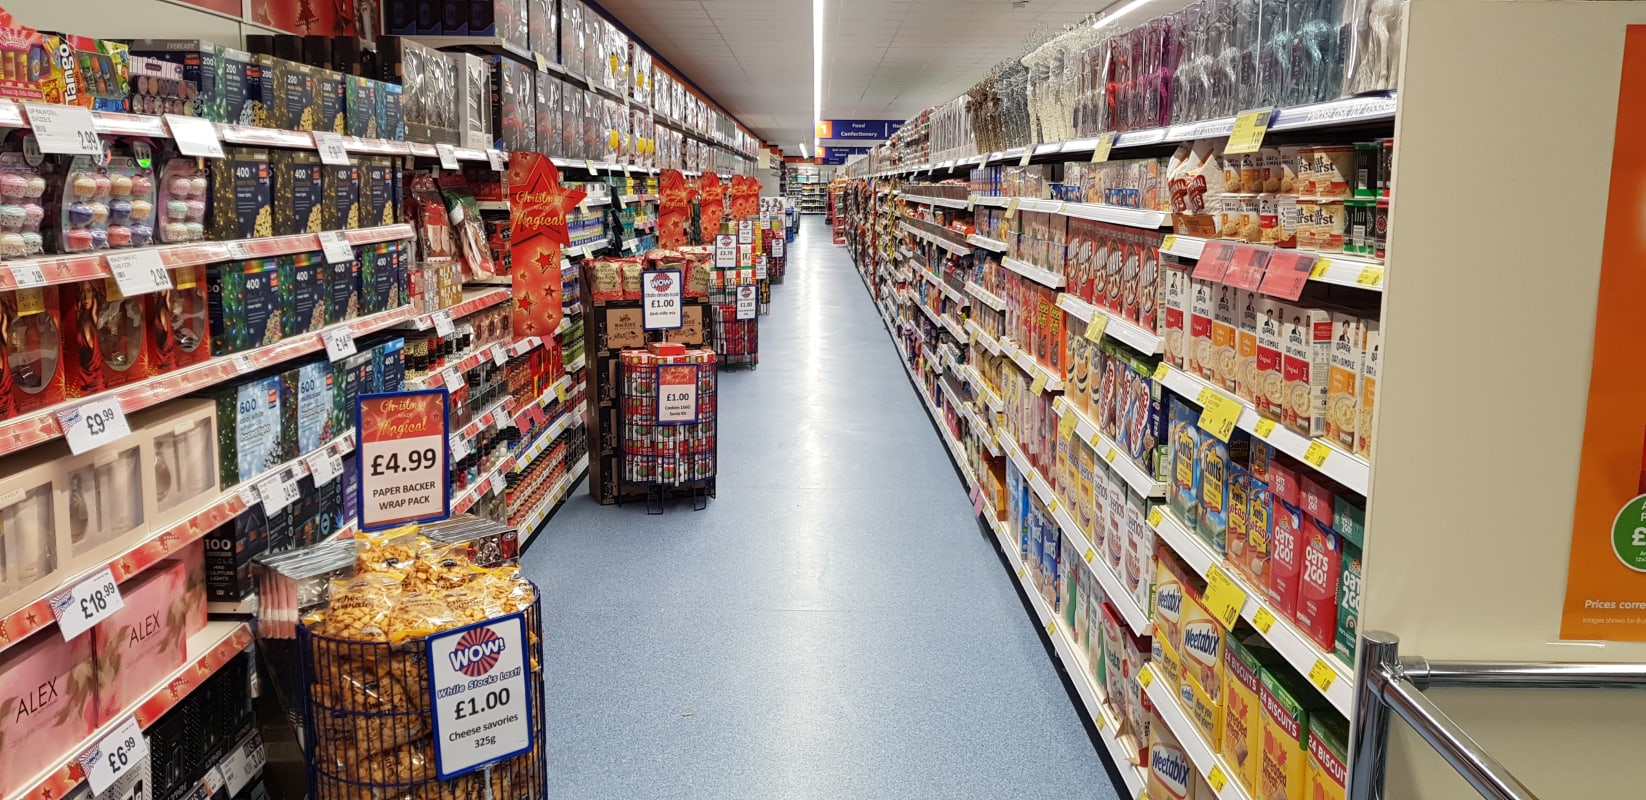 B&M's new store in Weston-super-Mare is home to B&M's famous Manager's Specials; the best deals and offers available on selected groceries, electricals, cleaning and much more!